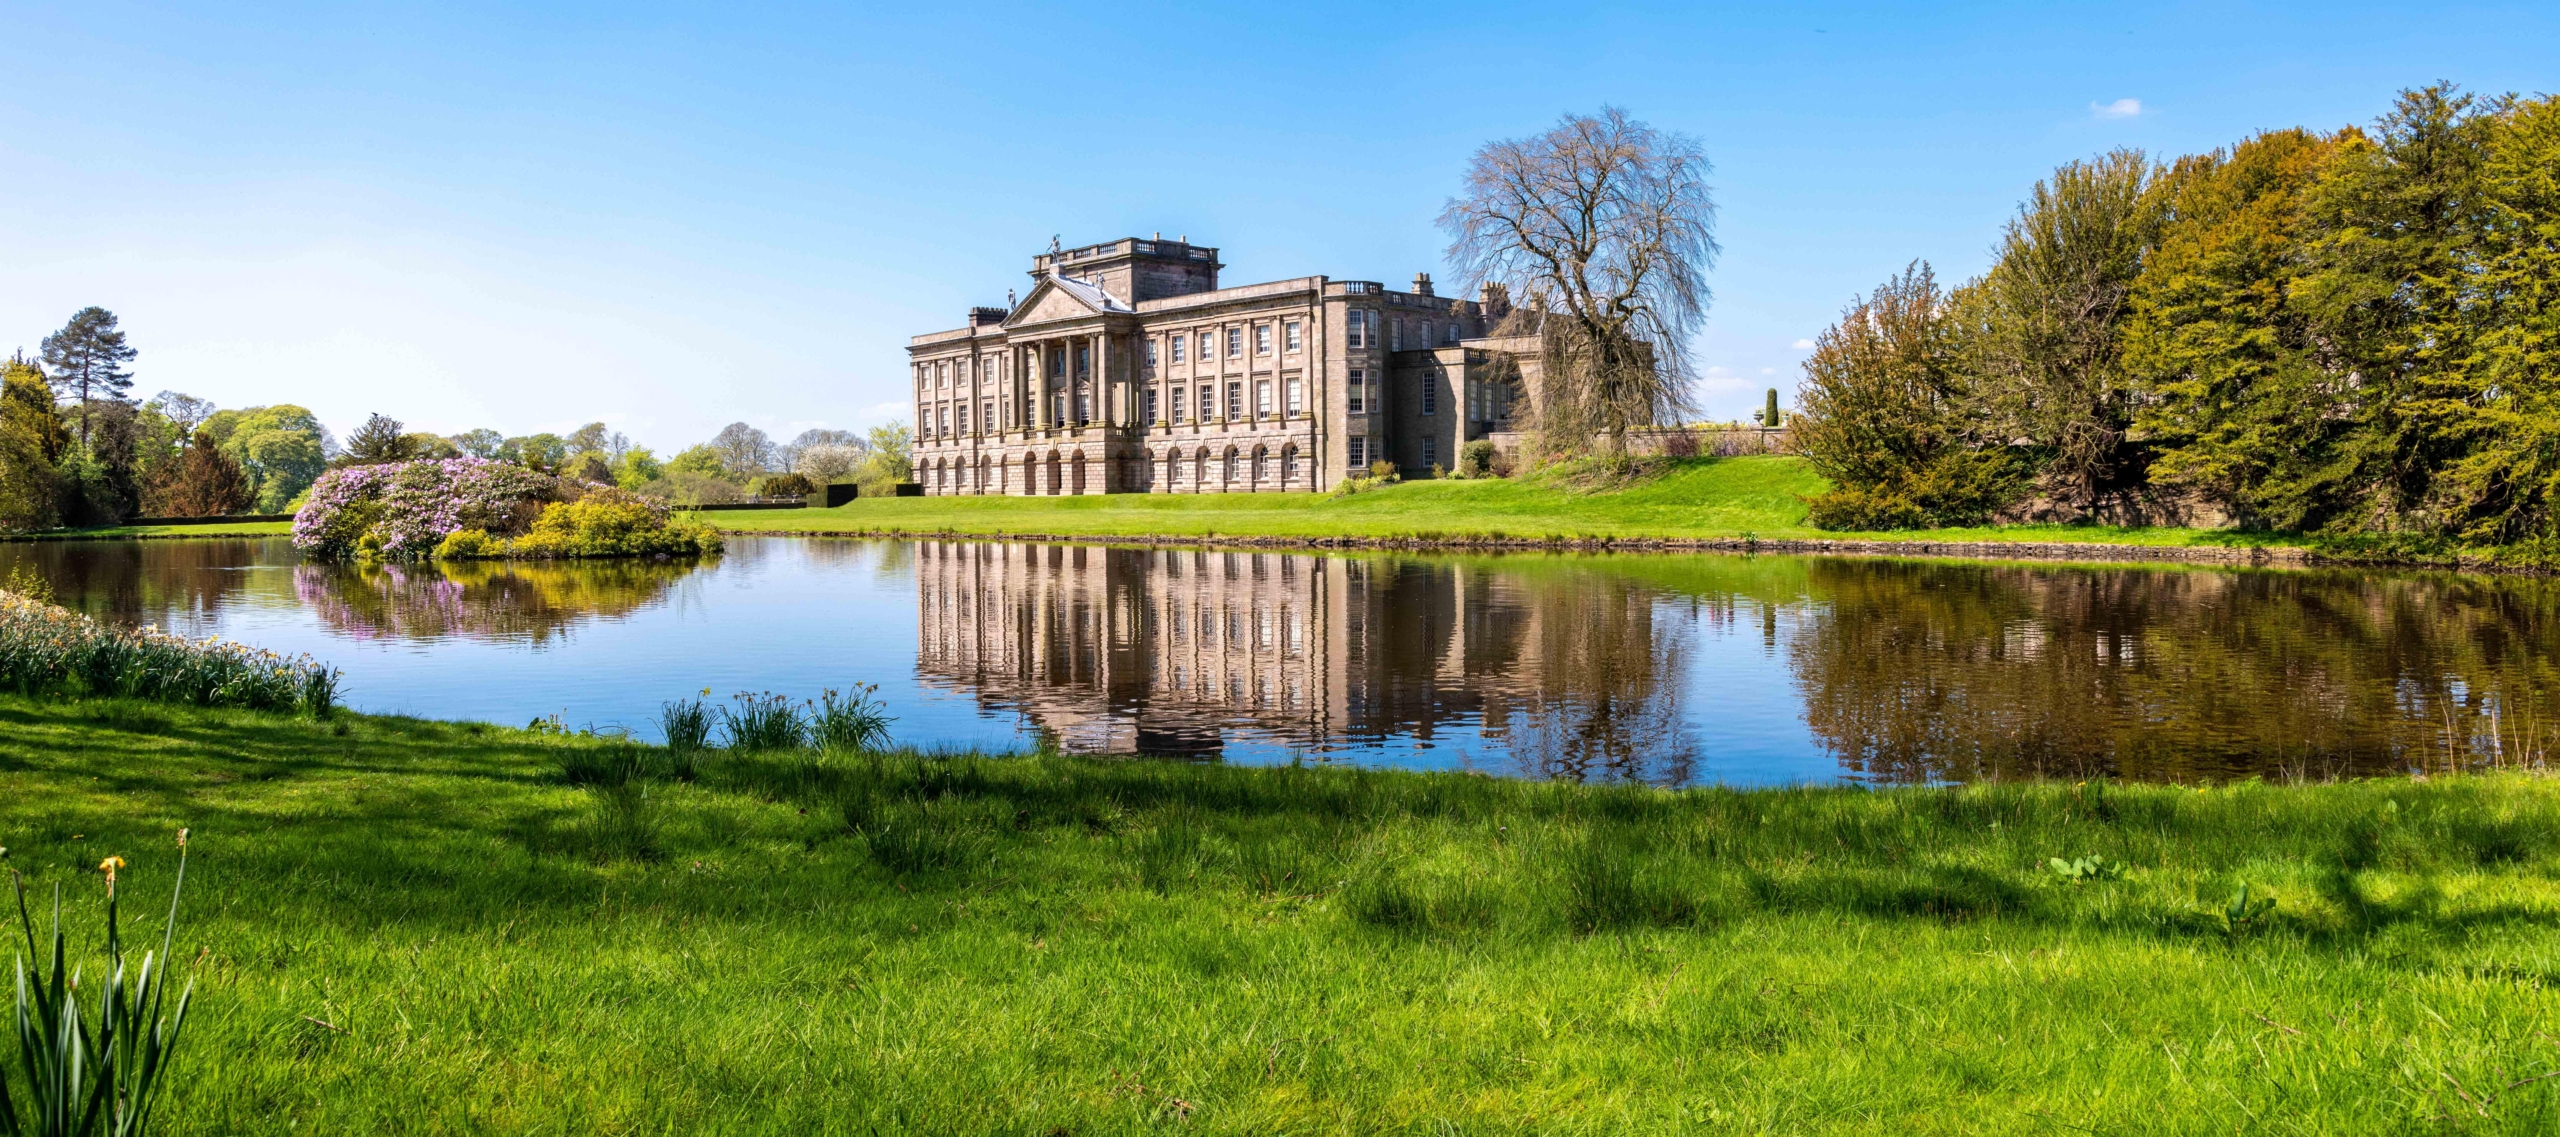 Lyme Park - showing a stately home and lake